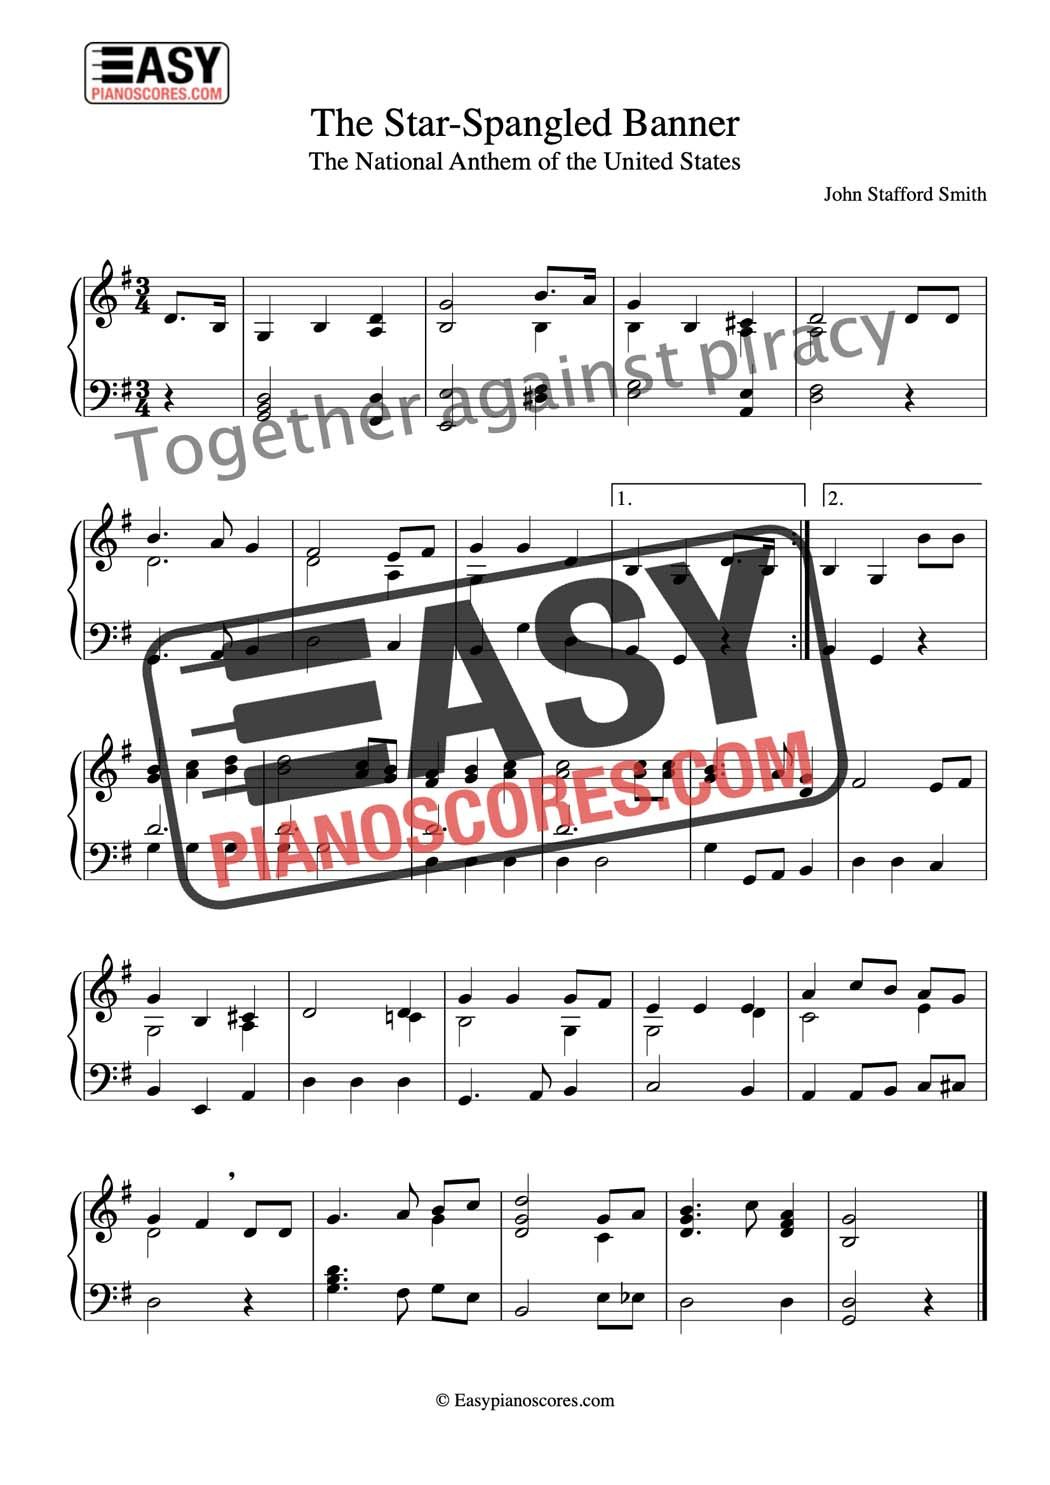 Star-Spangled Banner – Piano Sheet Music (Pdf) – Easypianoscores intended for Free Printable Piano Sheet Music For The Star Spangled Banner